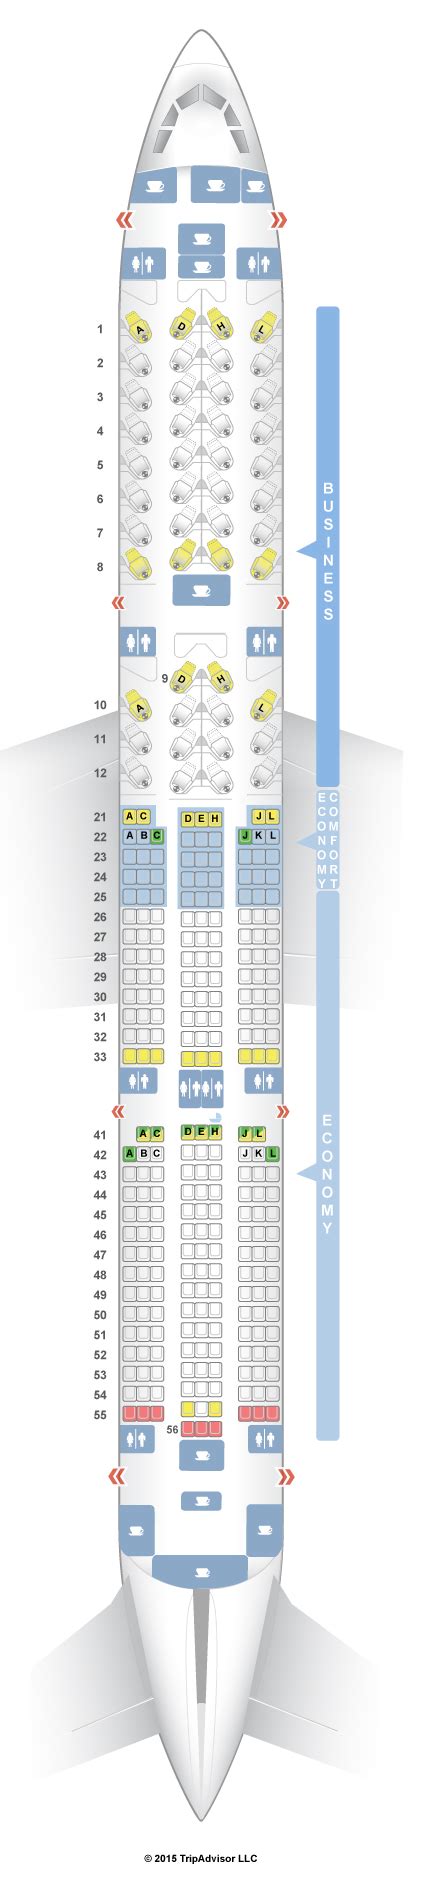 Airbus A350-900 (359) 31: 17: Standard: On-Demand TV: All Seats: AC Power: No: Airbus A350-900 (359) 37: 18.8: Recliner: On-Demand TV: All Seats: AC Power: No ... SeatGuru was created to help travelers choose the best seats and in-flight amenities. Forum; Mobile; FAQ; Contact Us; Site Map;. 